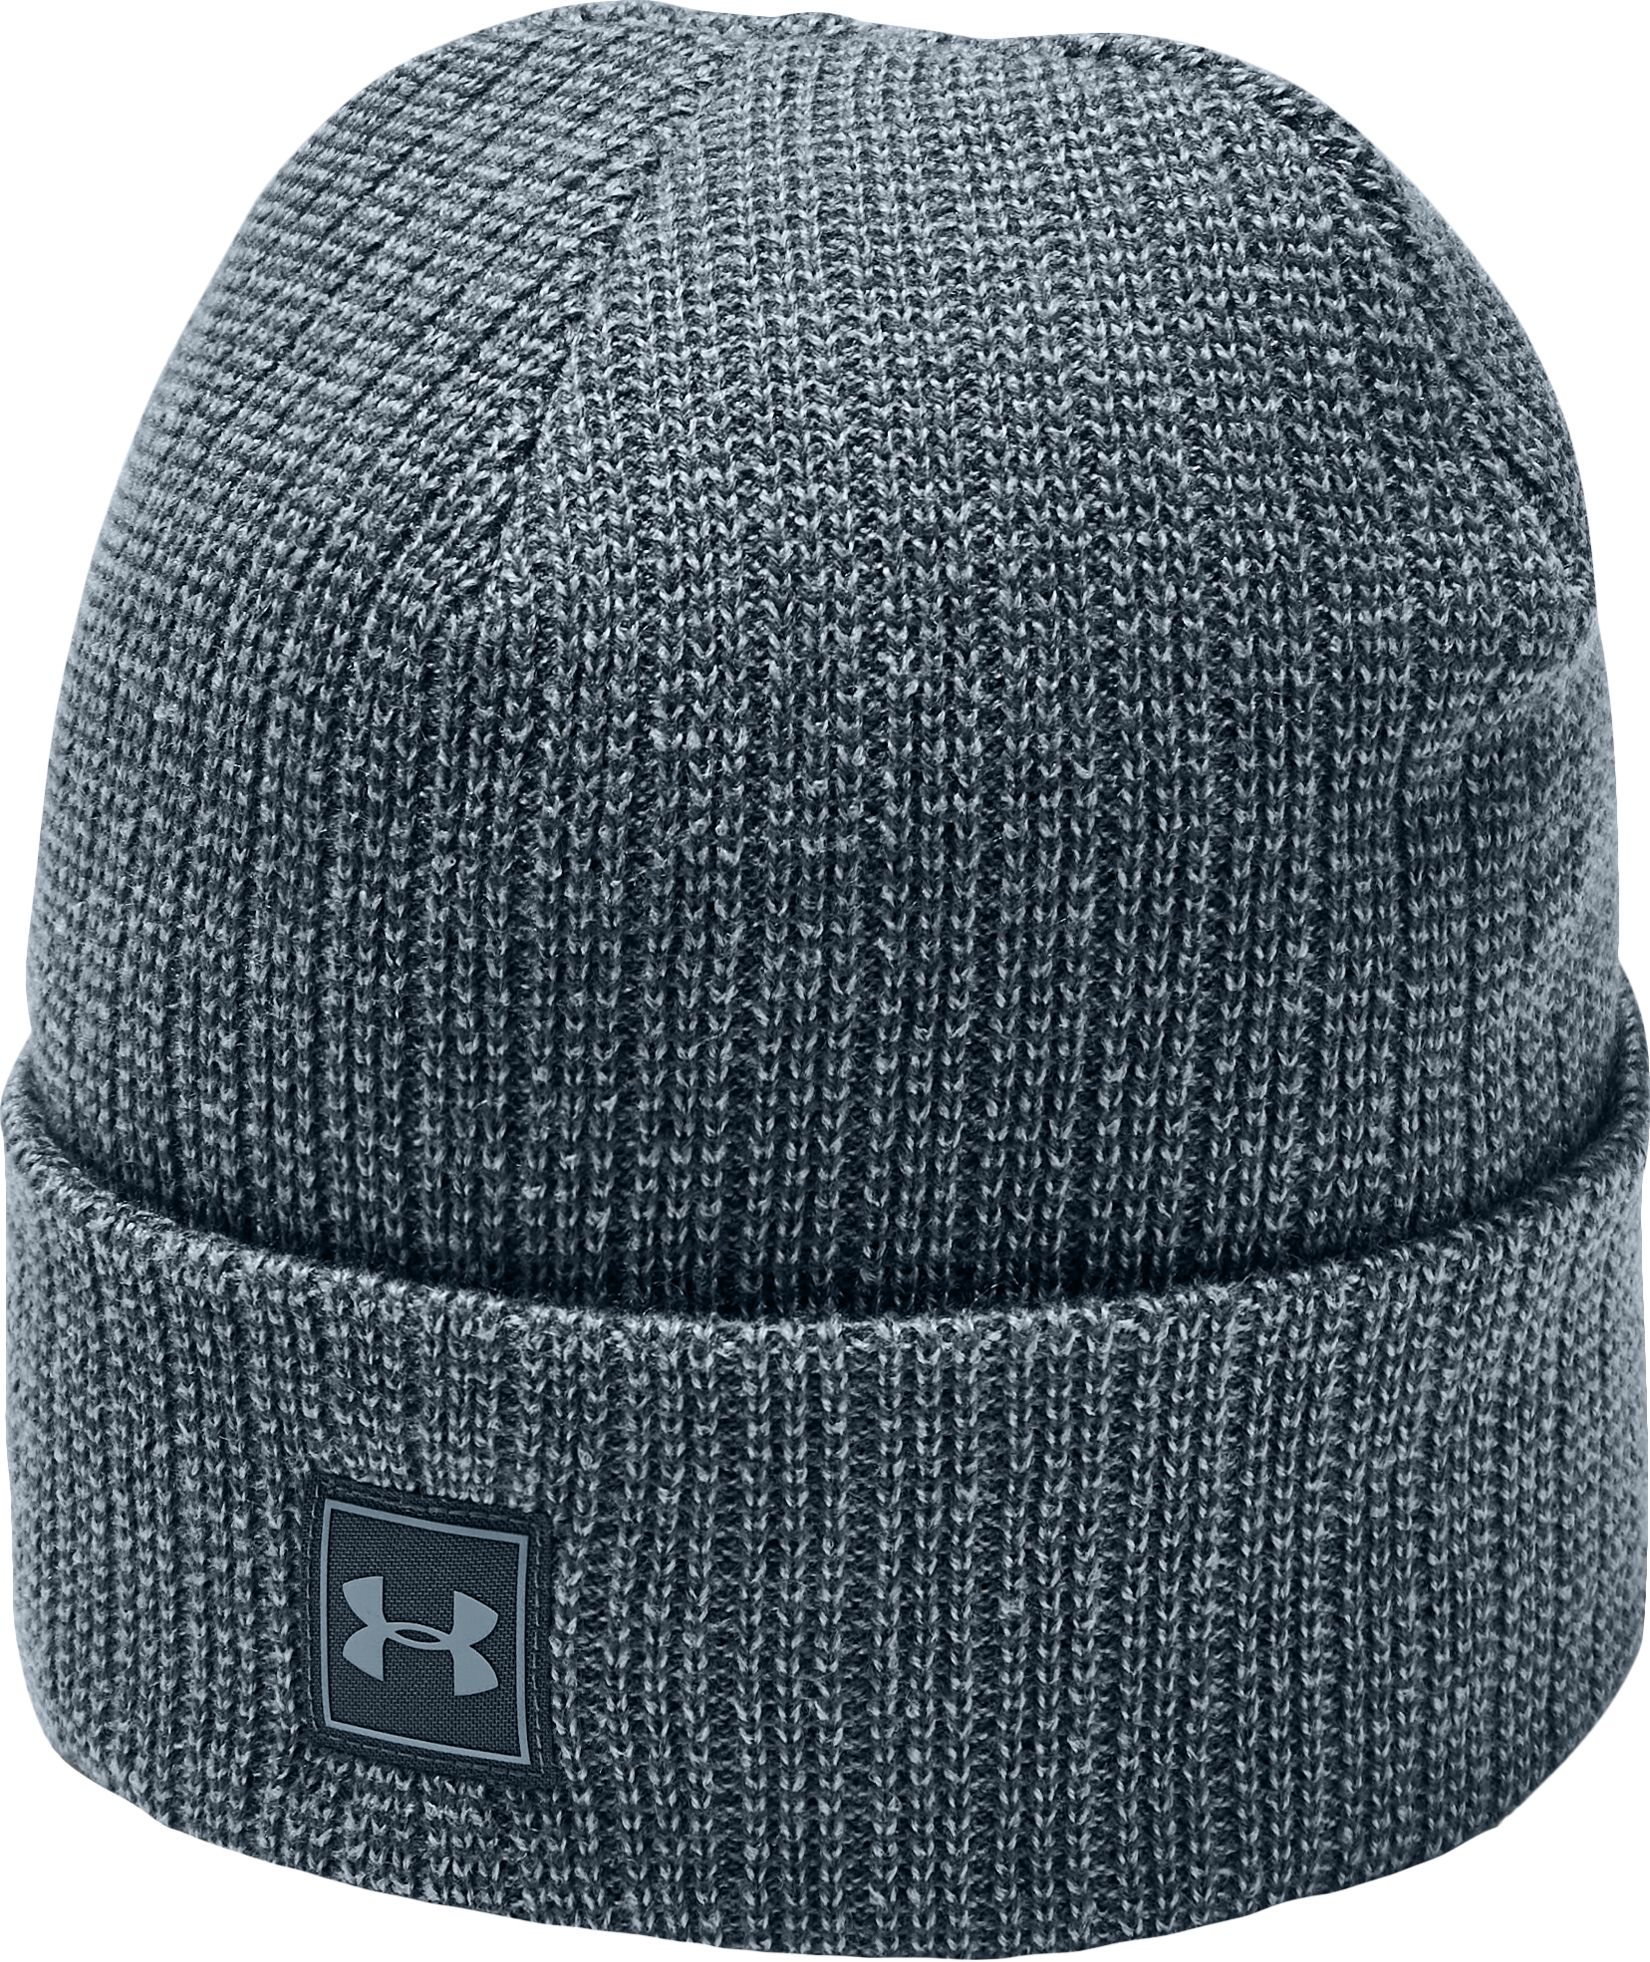 under armour womens winter hats